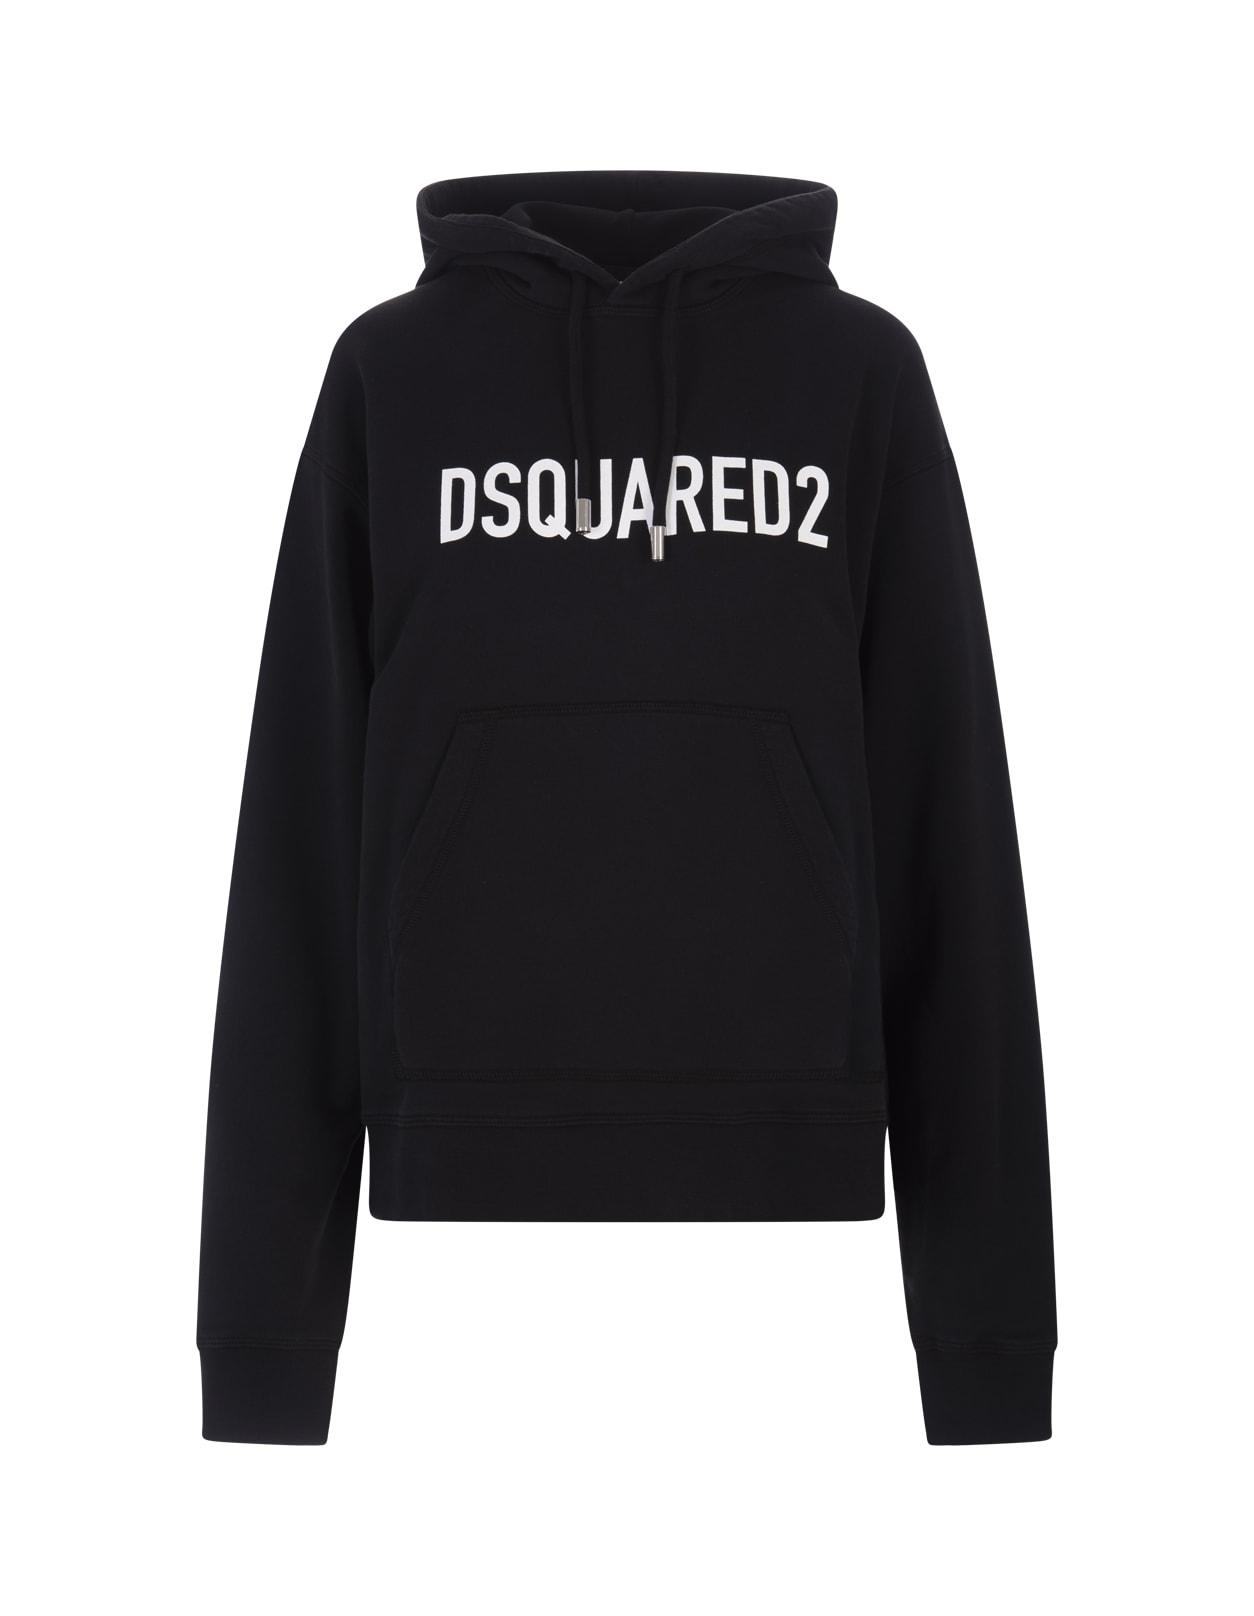 DSQUARED2 WOMAN BLACK HOODIE WITH LOGO